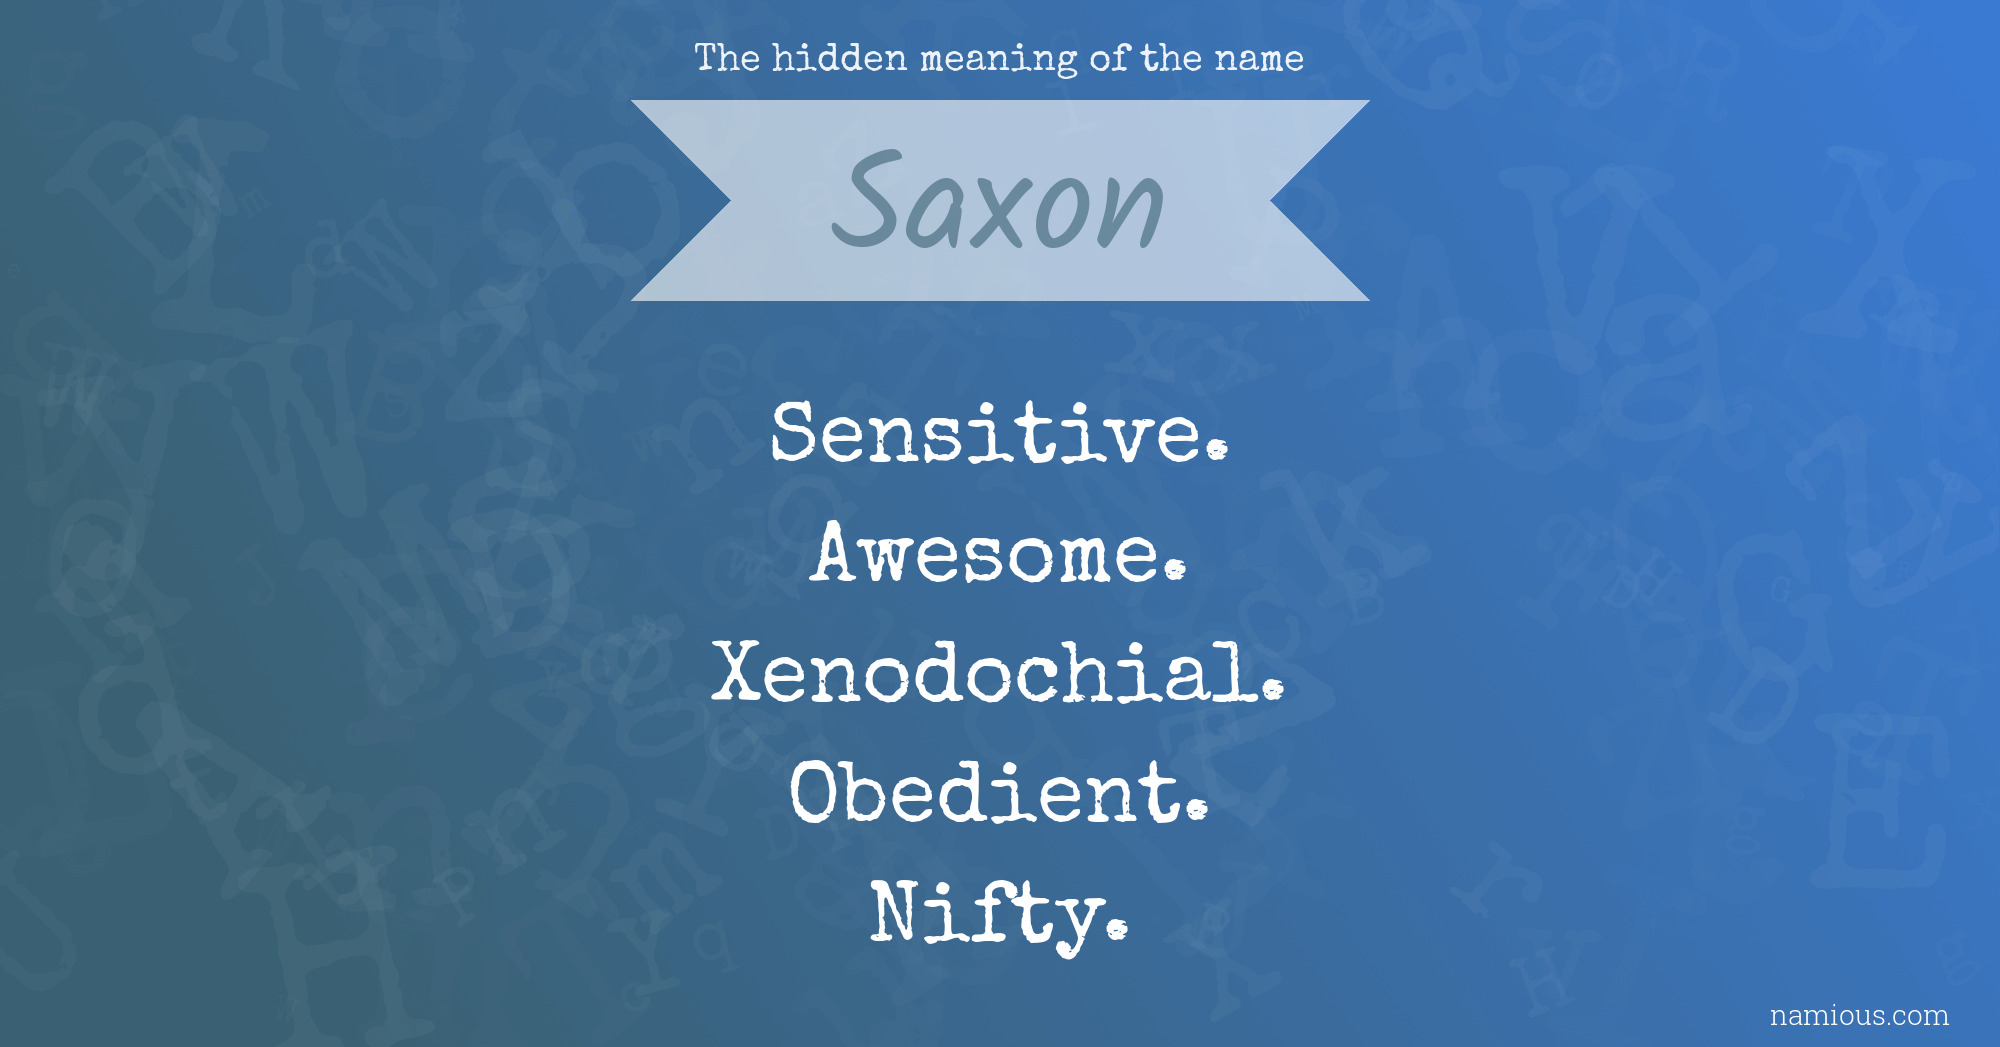 The hidden meaning of the name Saxon